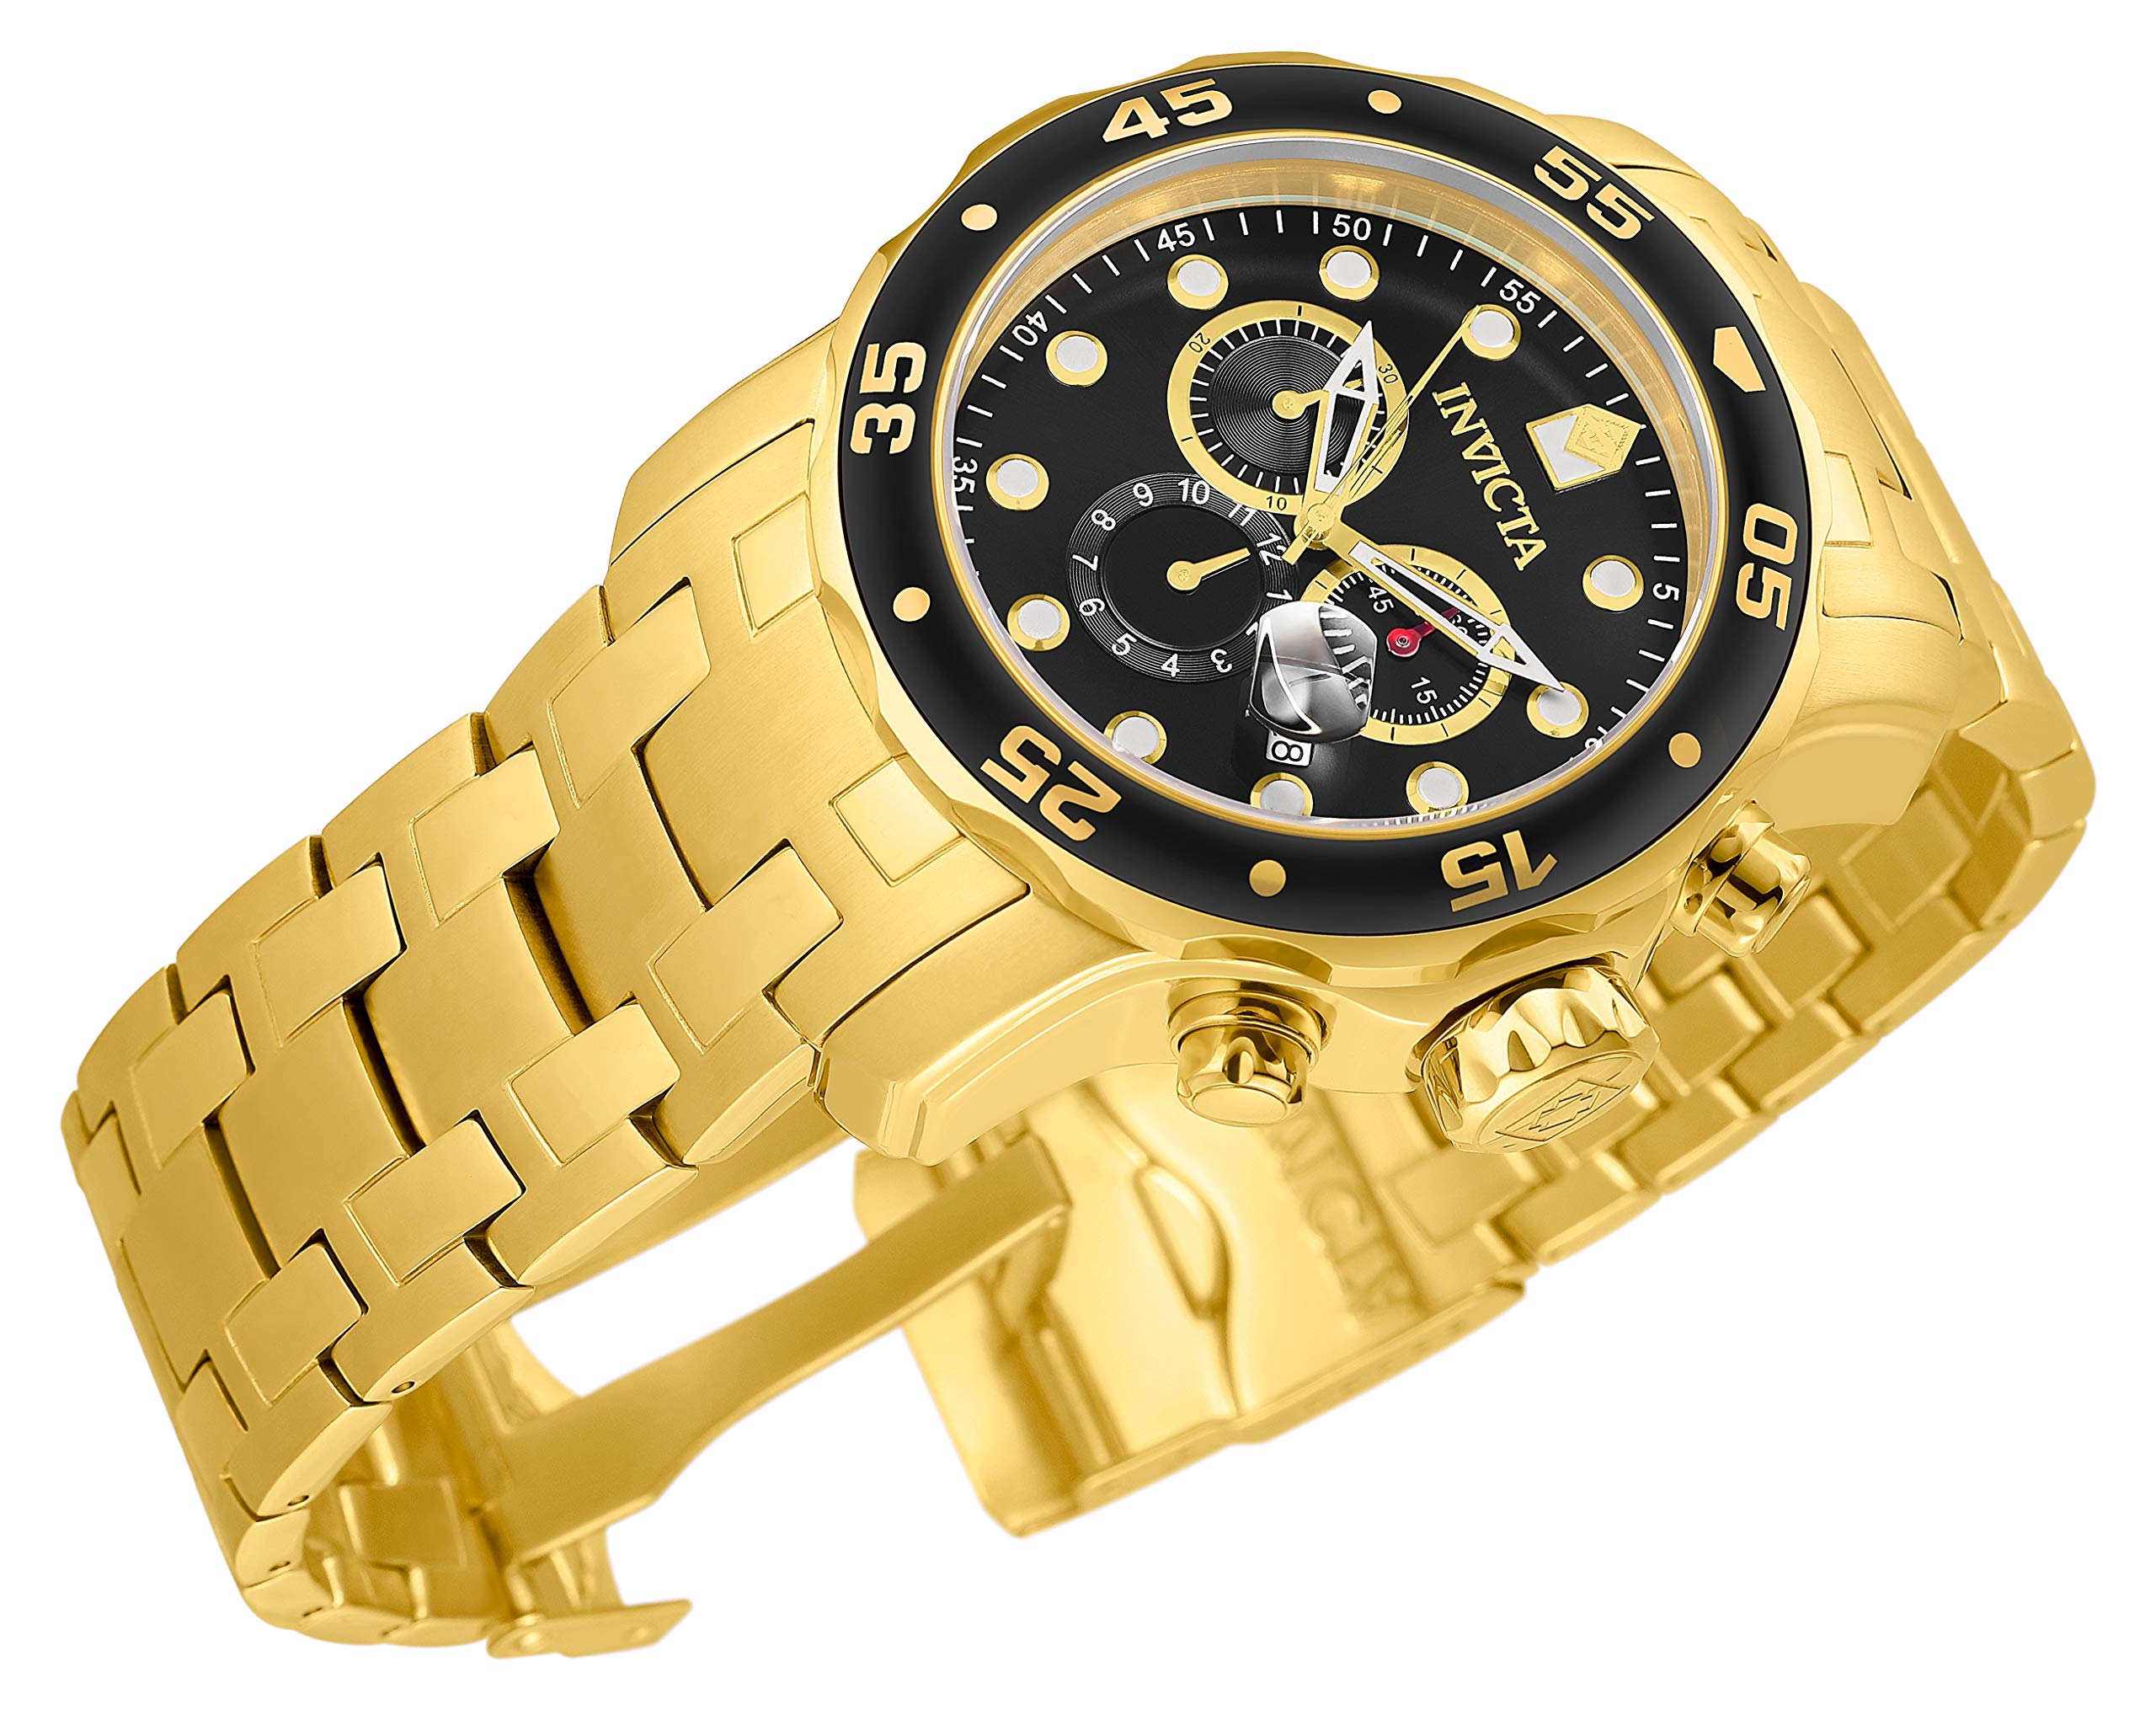 Invicta Men's Pro Diver Collection Chronograph 18k Gold-Plated Watch (Model: 0072, 21954, 21958)